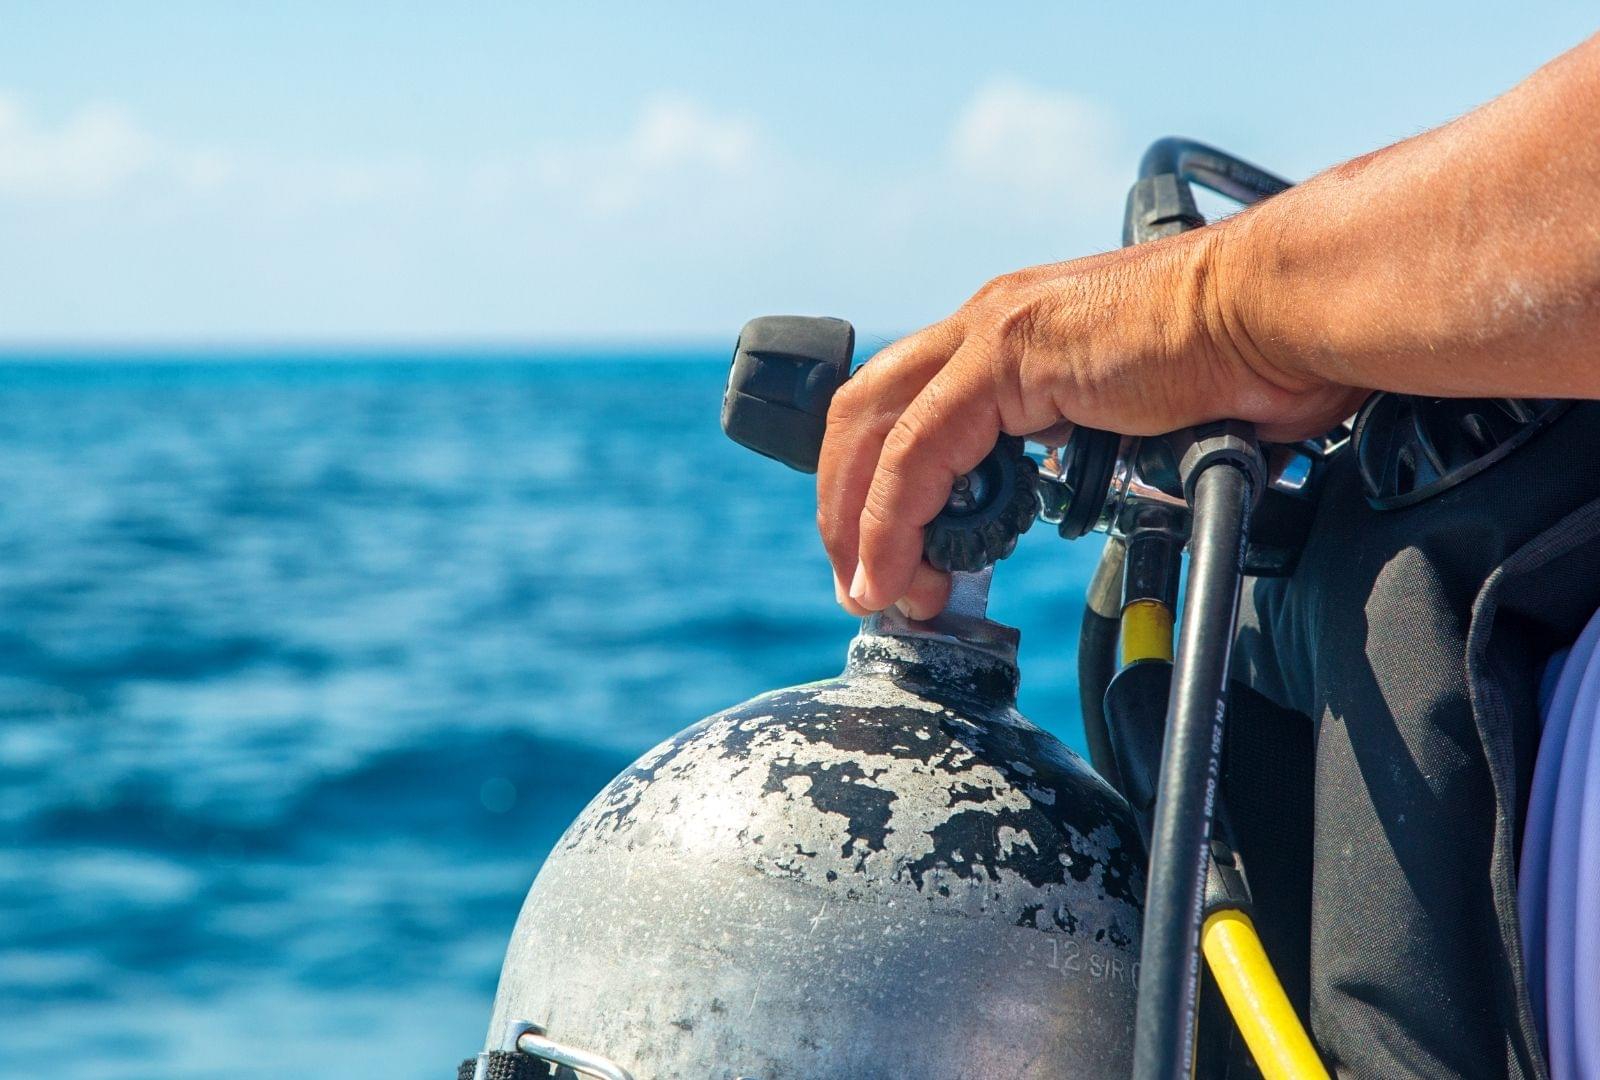 How much does scuba diving cost?